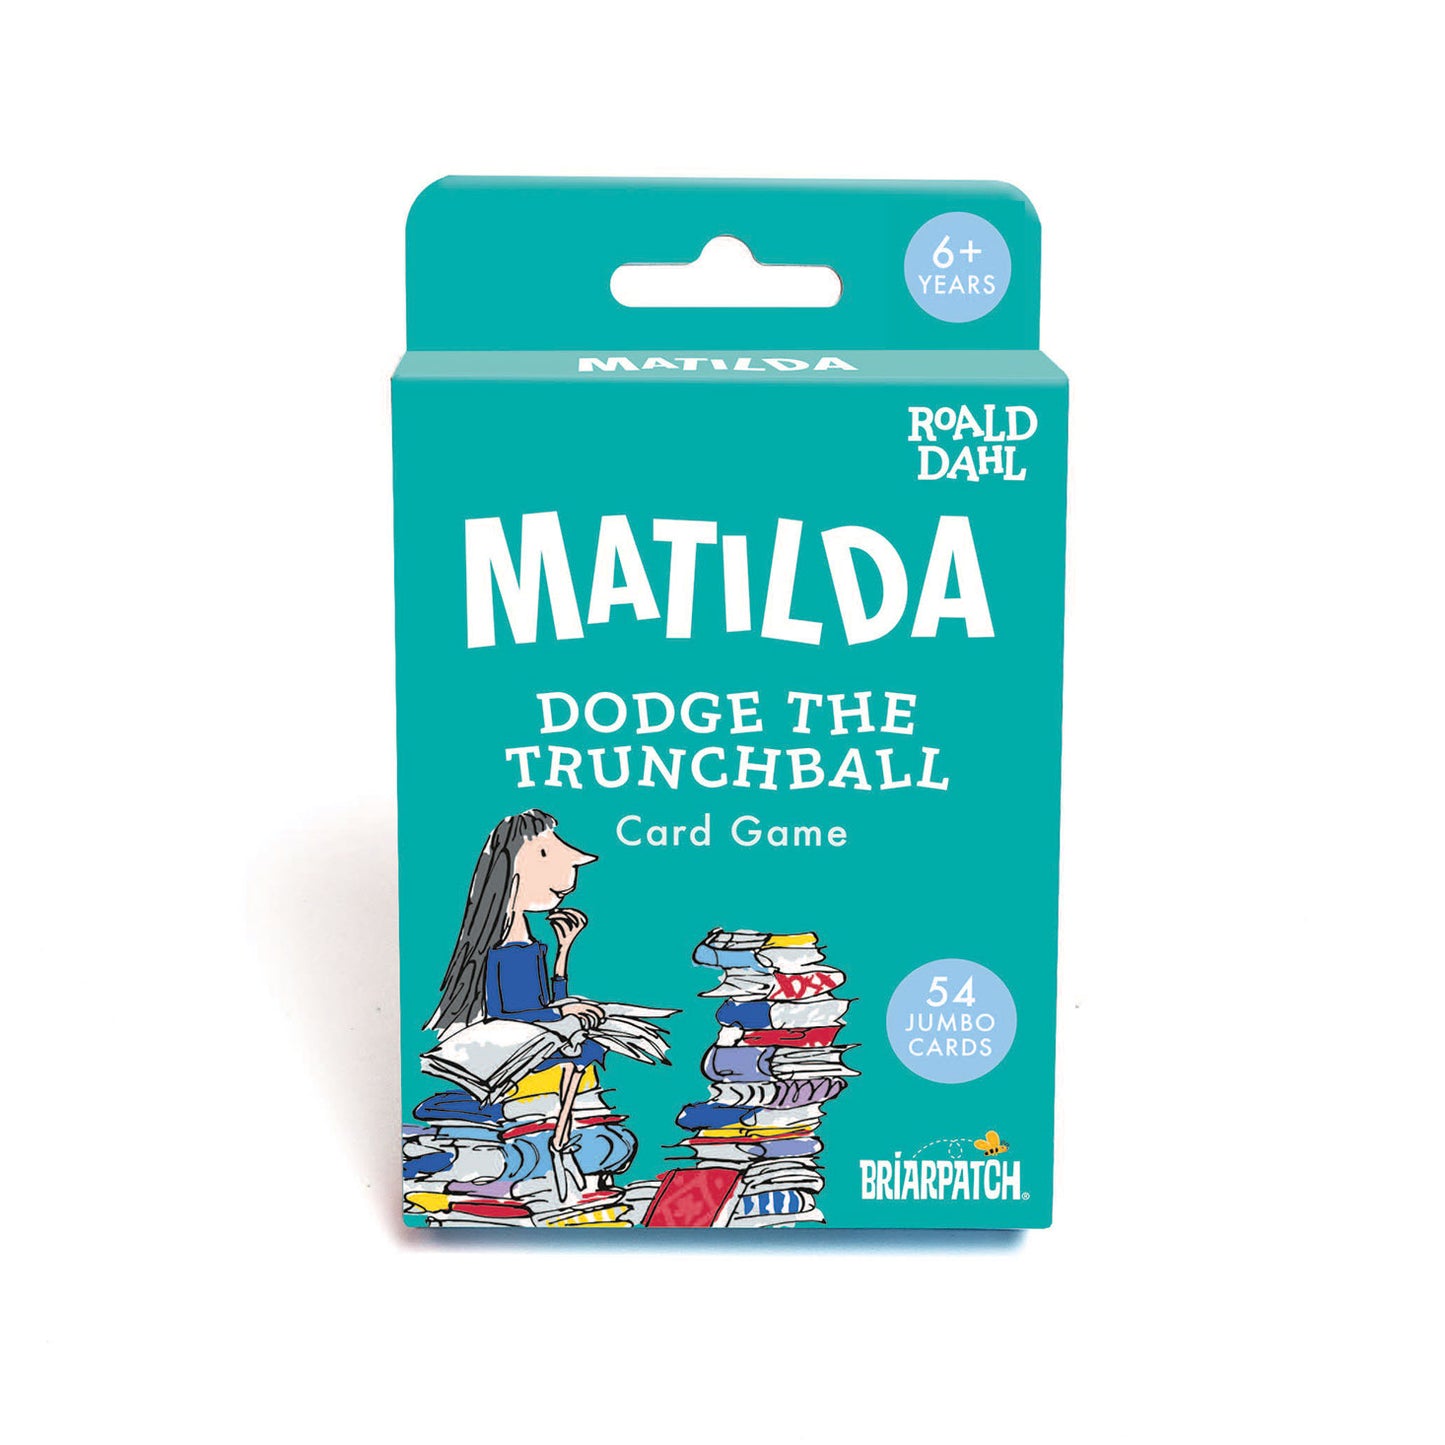 Matilda Dodge The Trunchbull Card Game by Roald Dahl and Quentin Blake